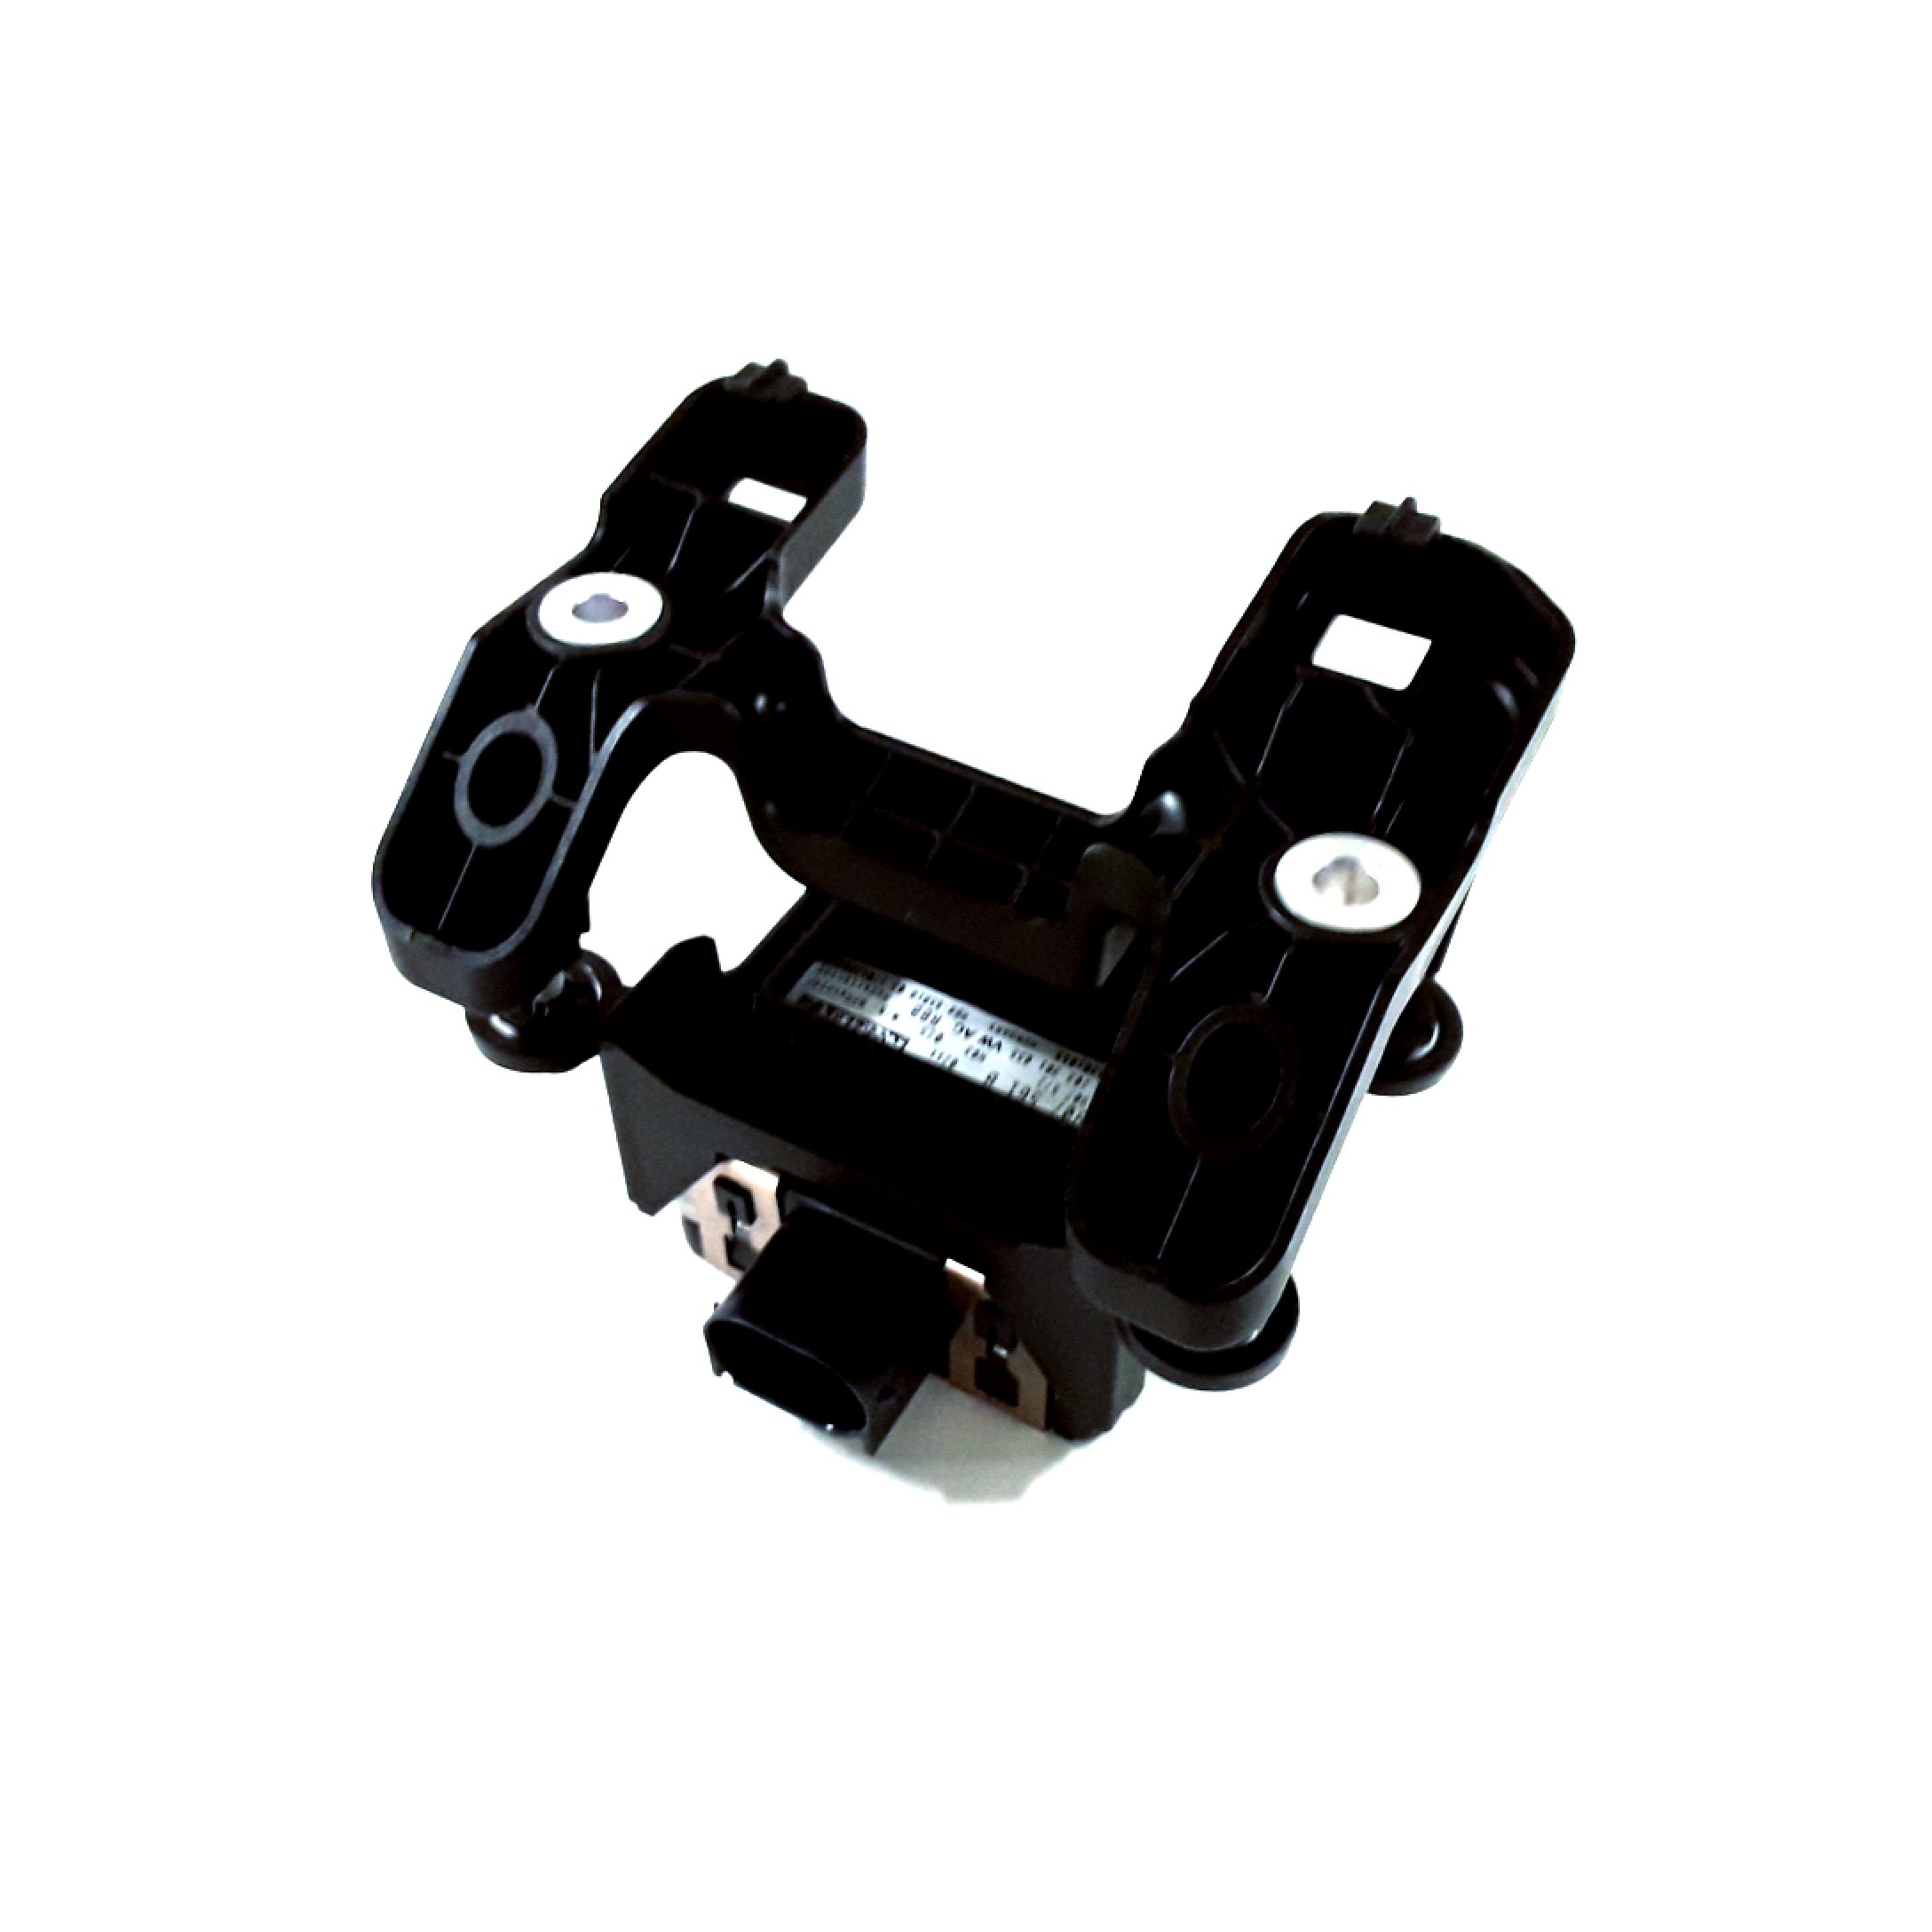 View 561907561B Cruise Control Distance Sensor Full-Sized Product Image